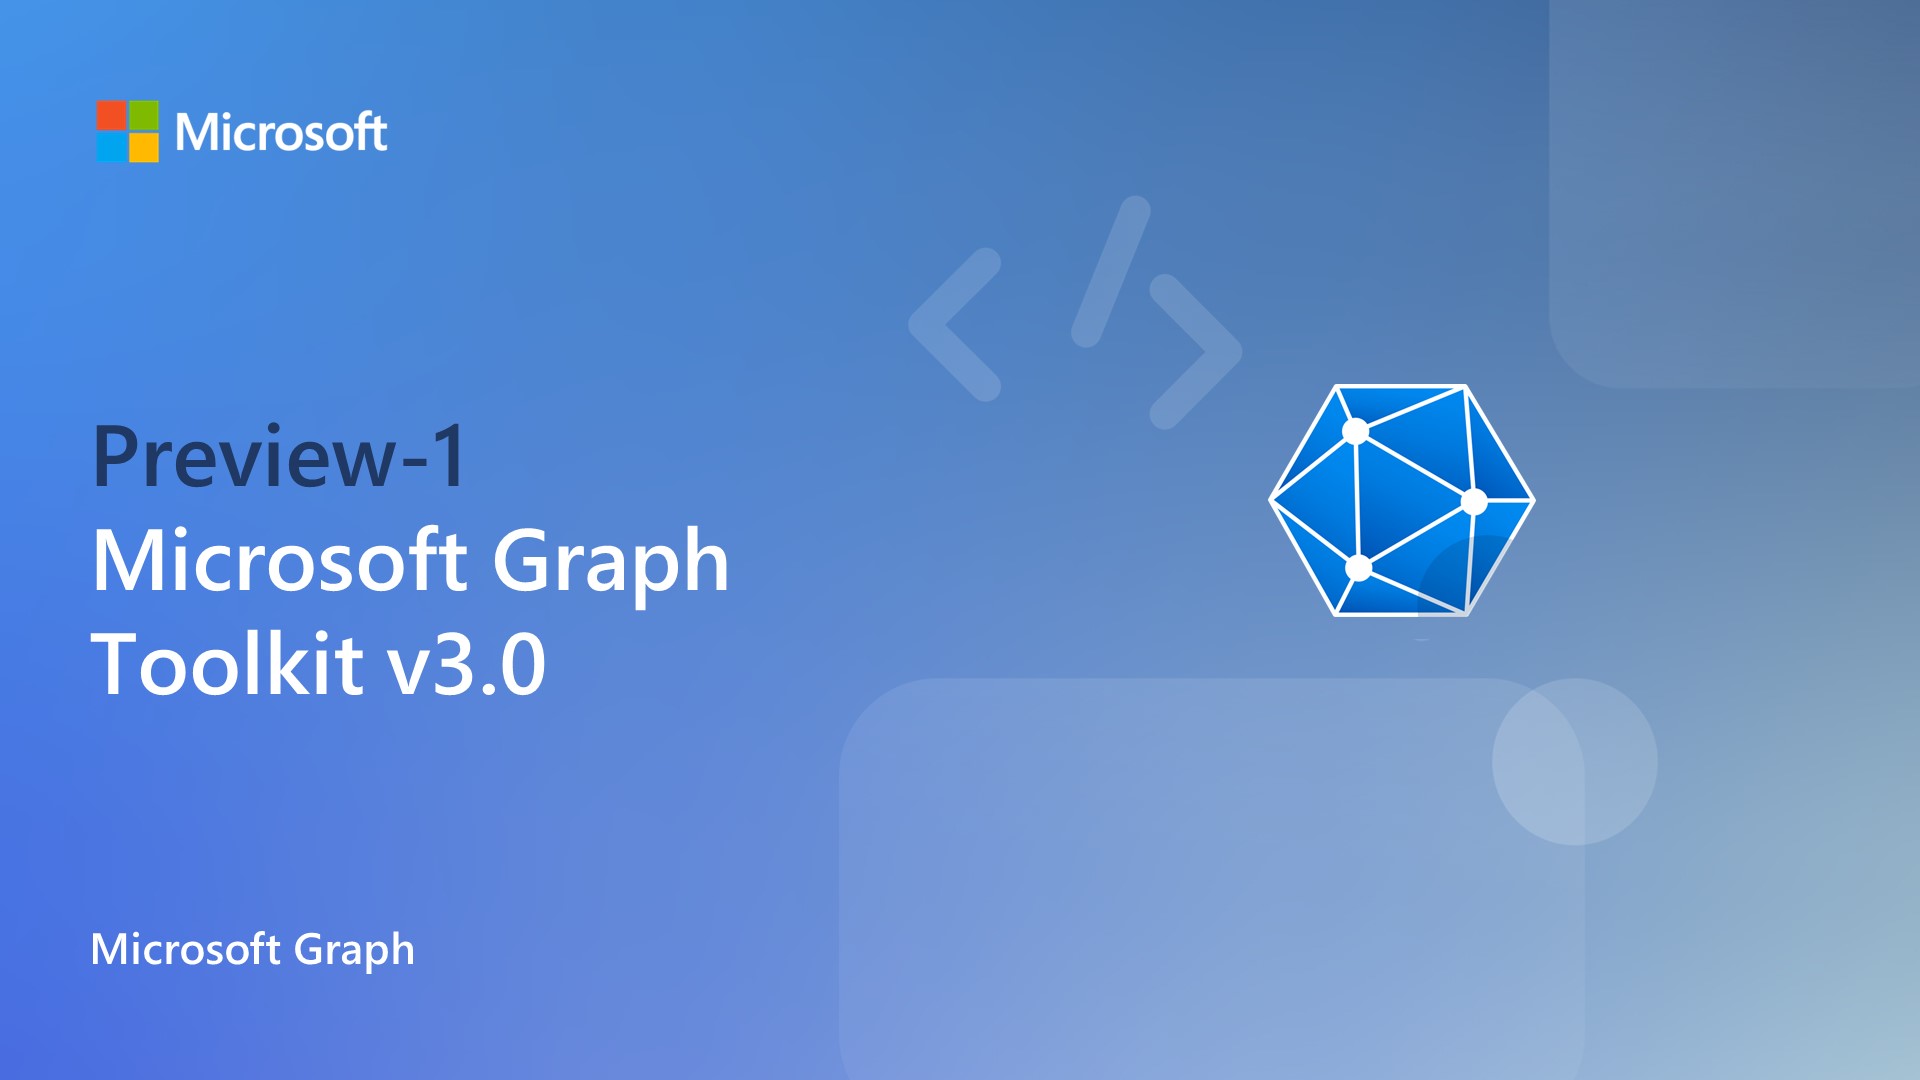 Announcing Microsoft Graph Toolkit v3.0 preview-1